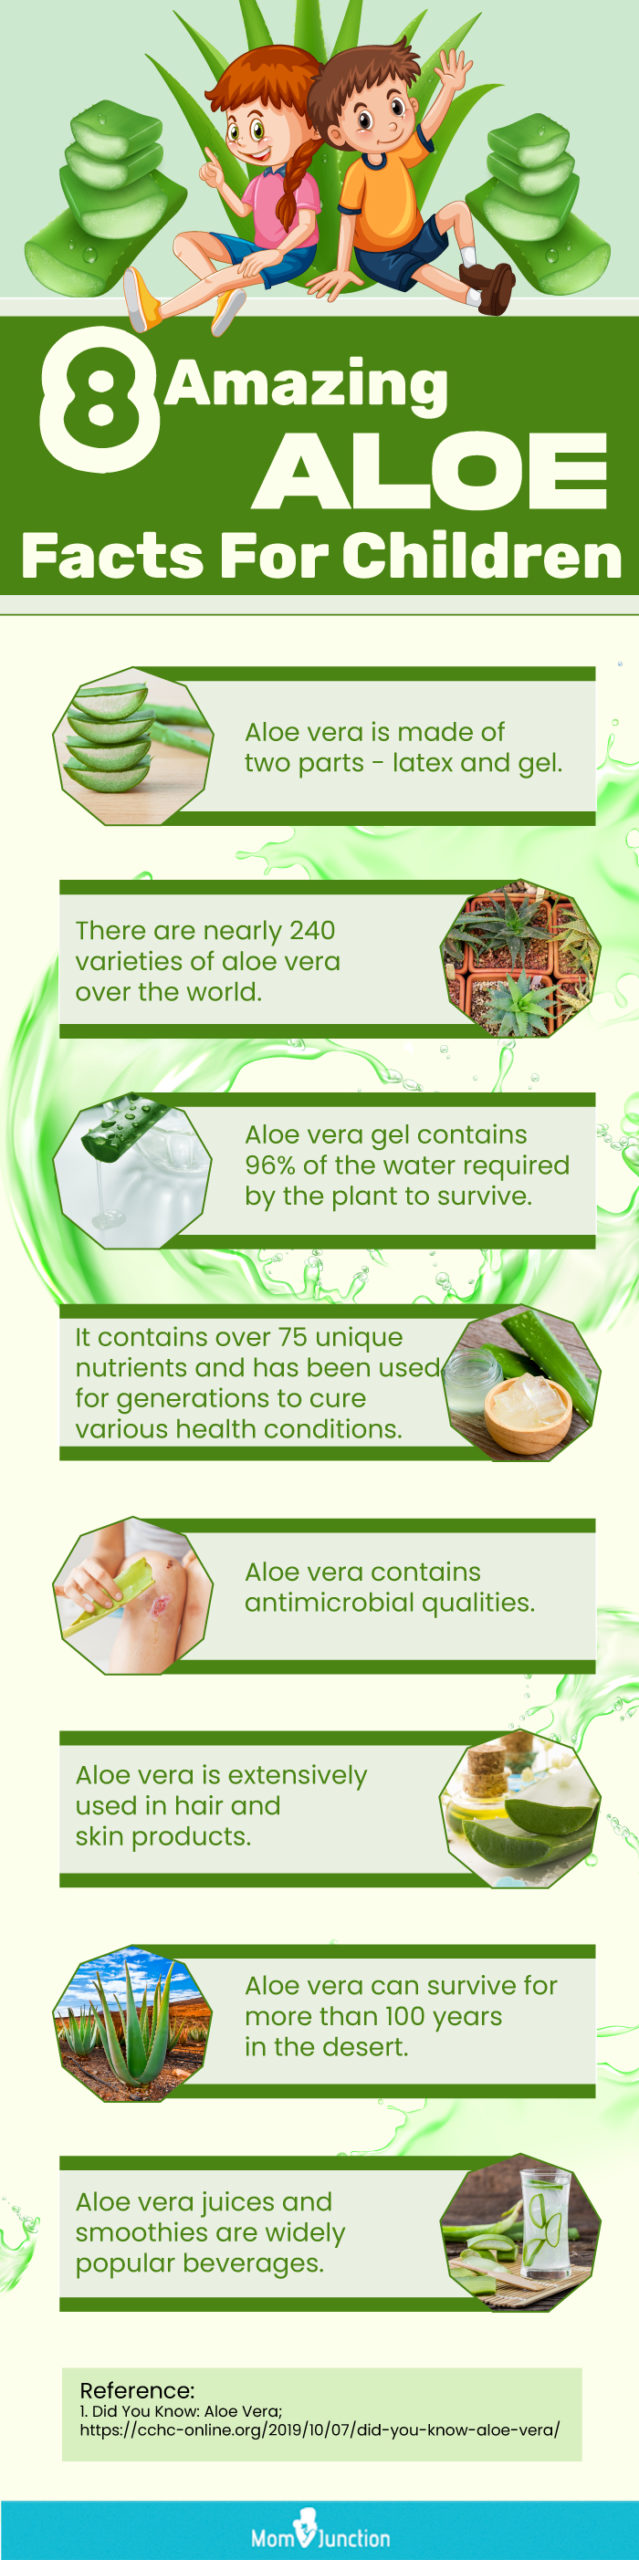 interesting facts about aloe vera for children (infographic)